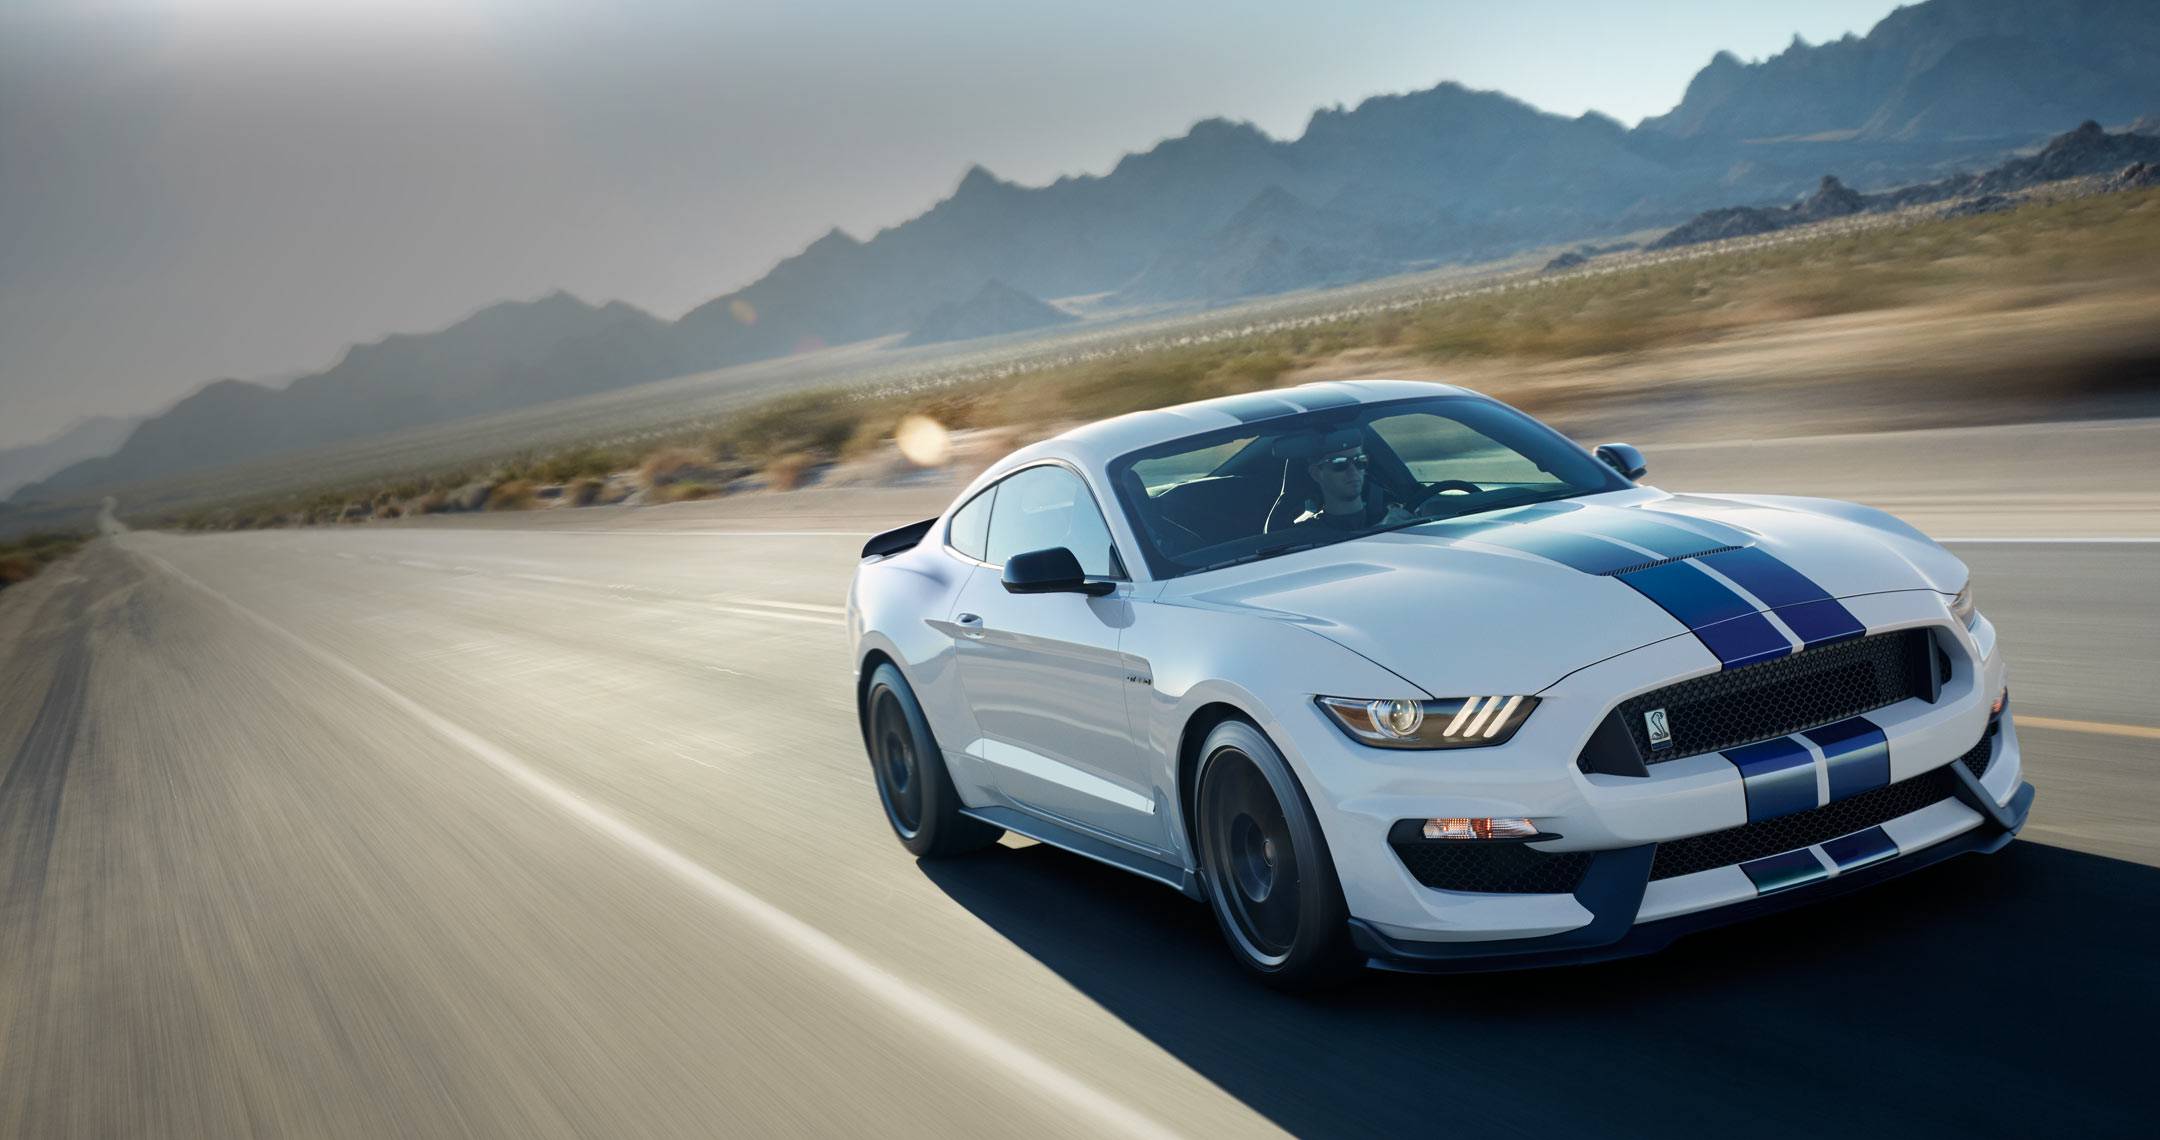 Nice wallpapers Ford Mustang Shelby 2160x1140px